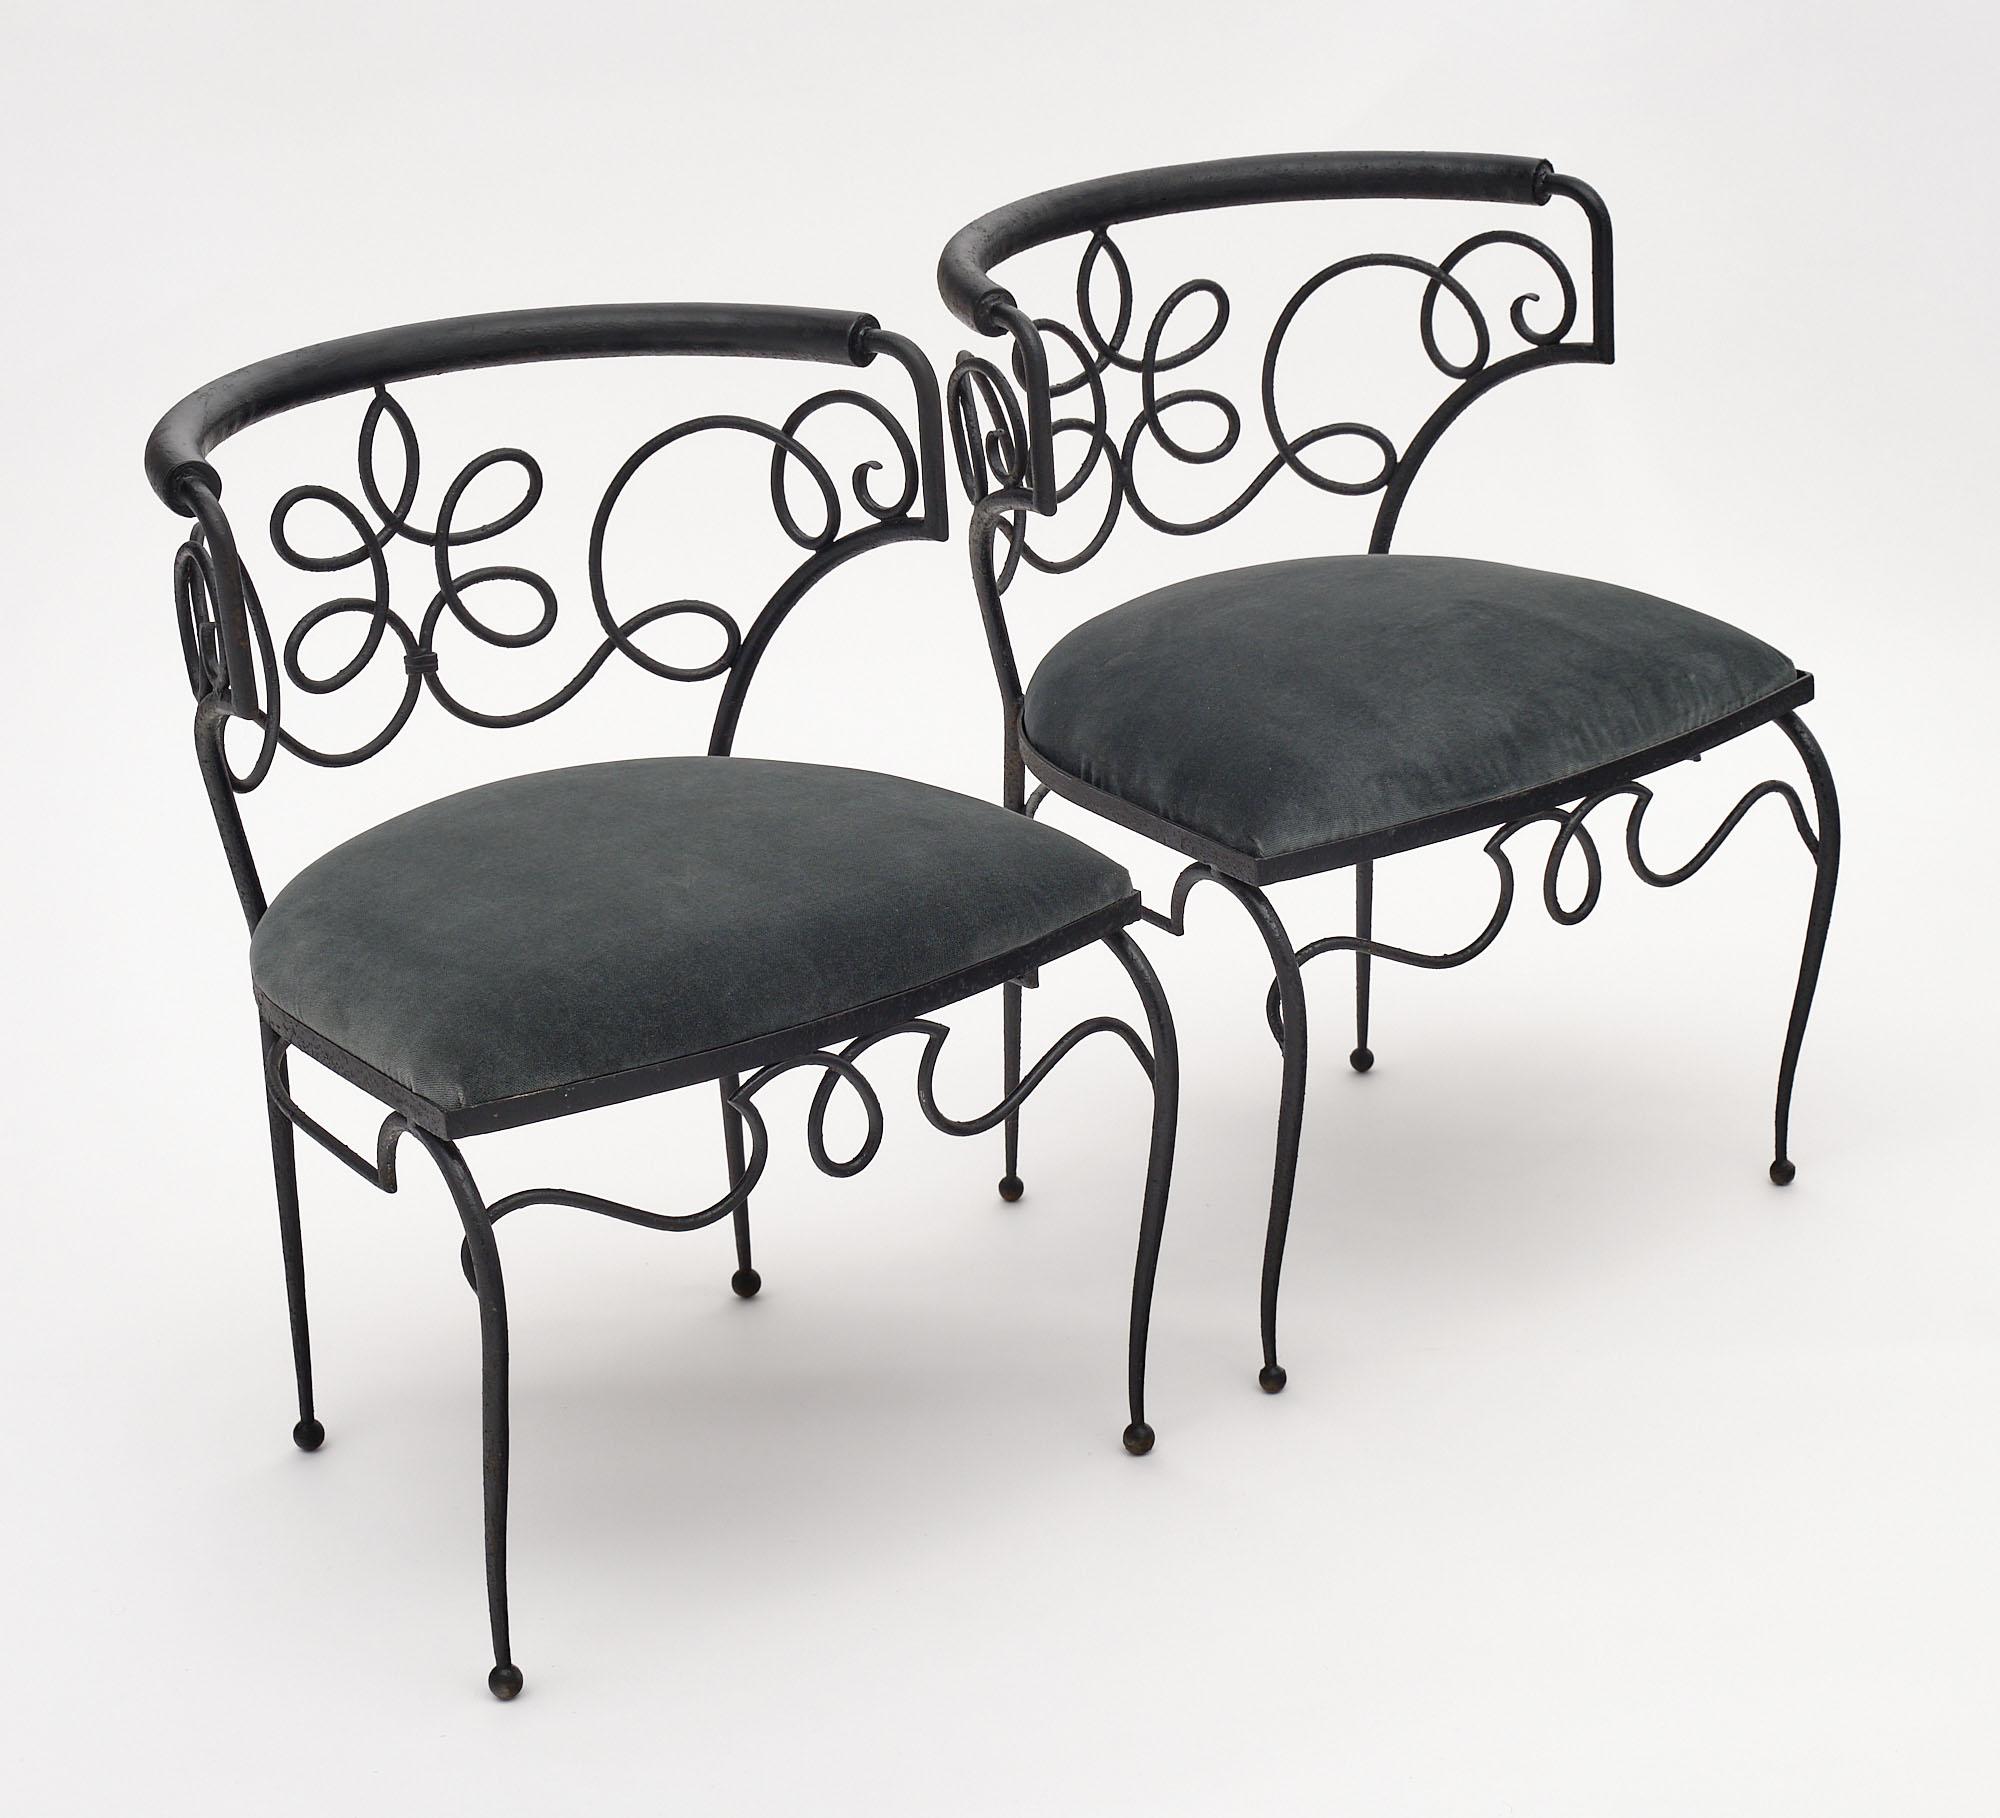 A pair of armchairs made of wrought iron by René Drouet. They have been newly upholstered in a gray velvet blend.